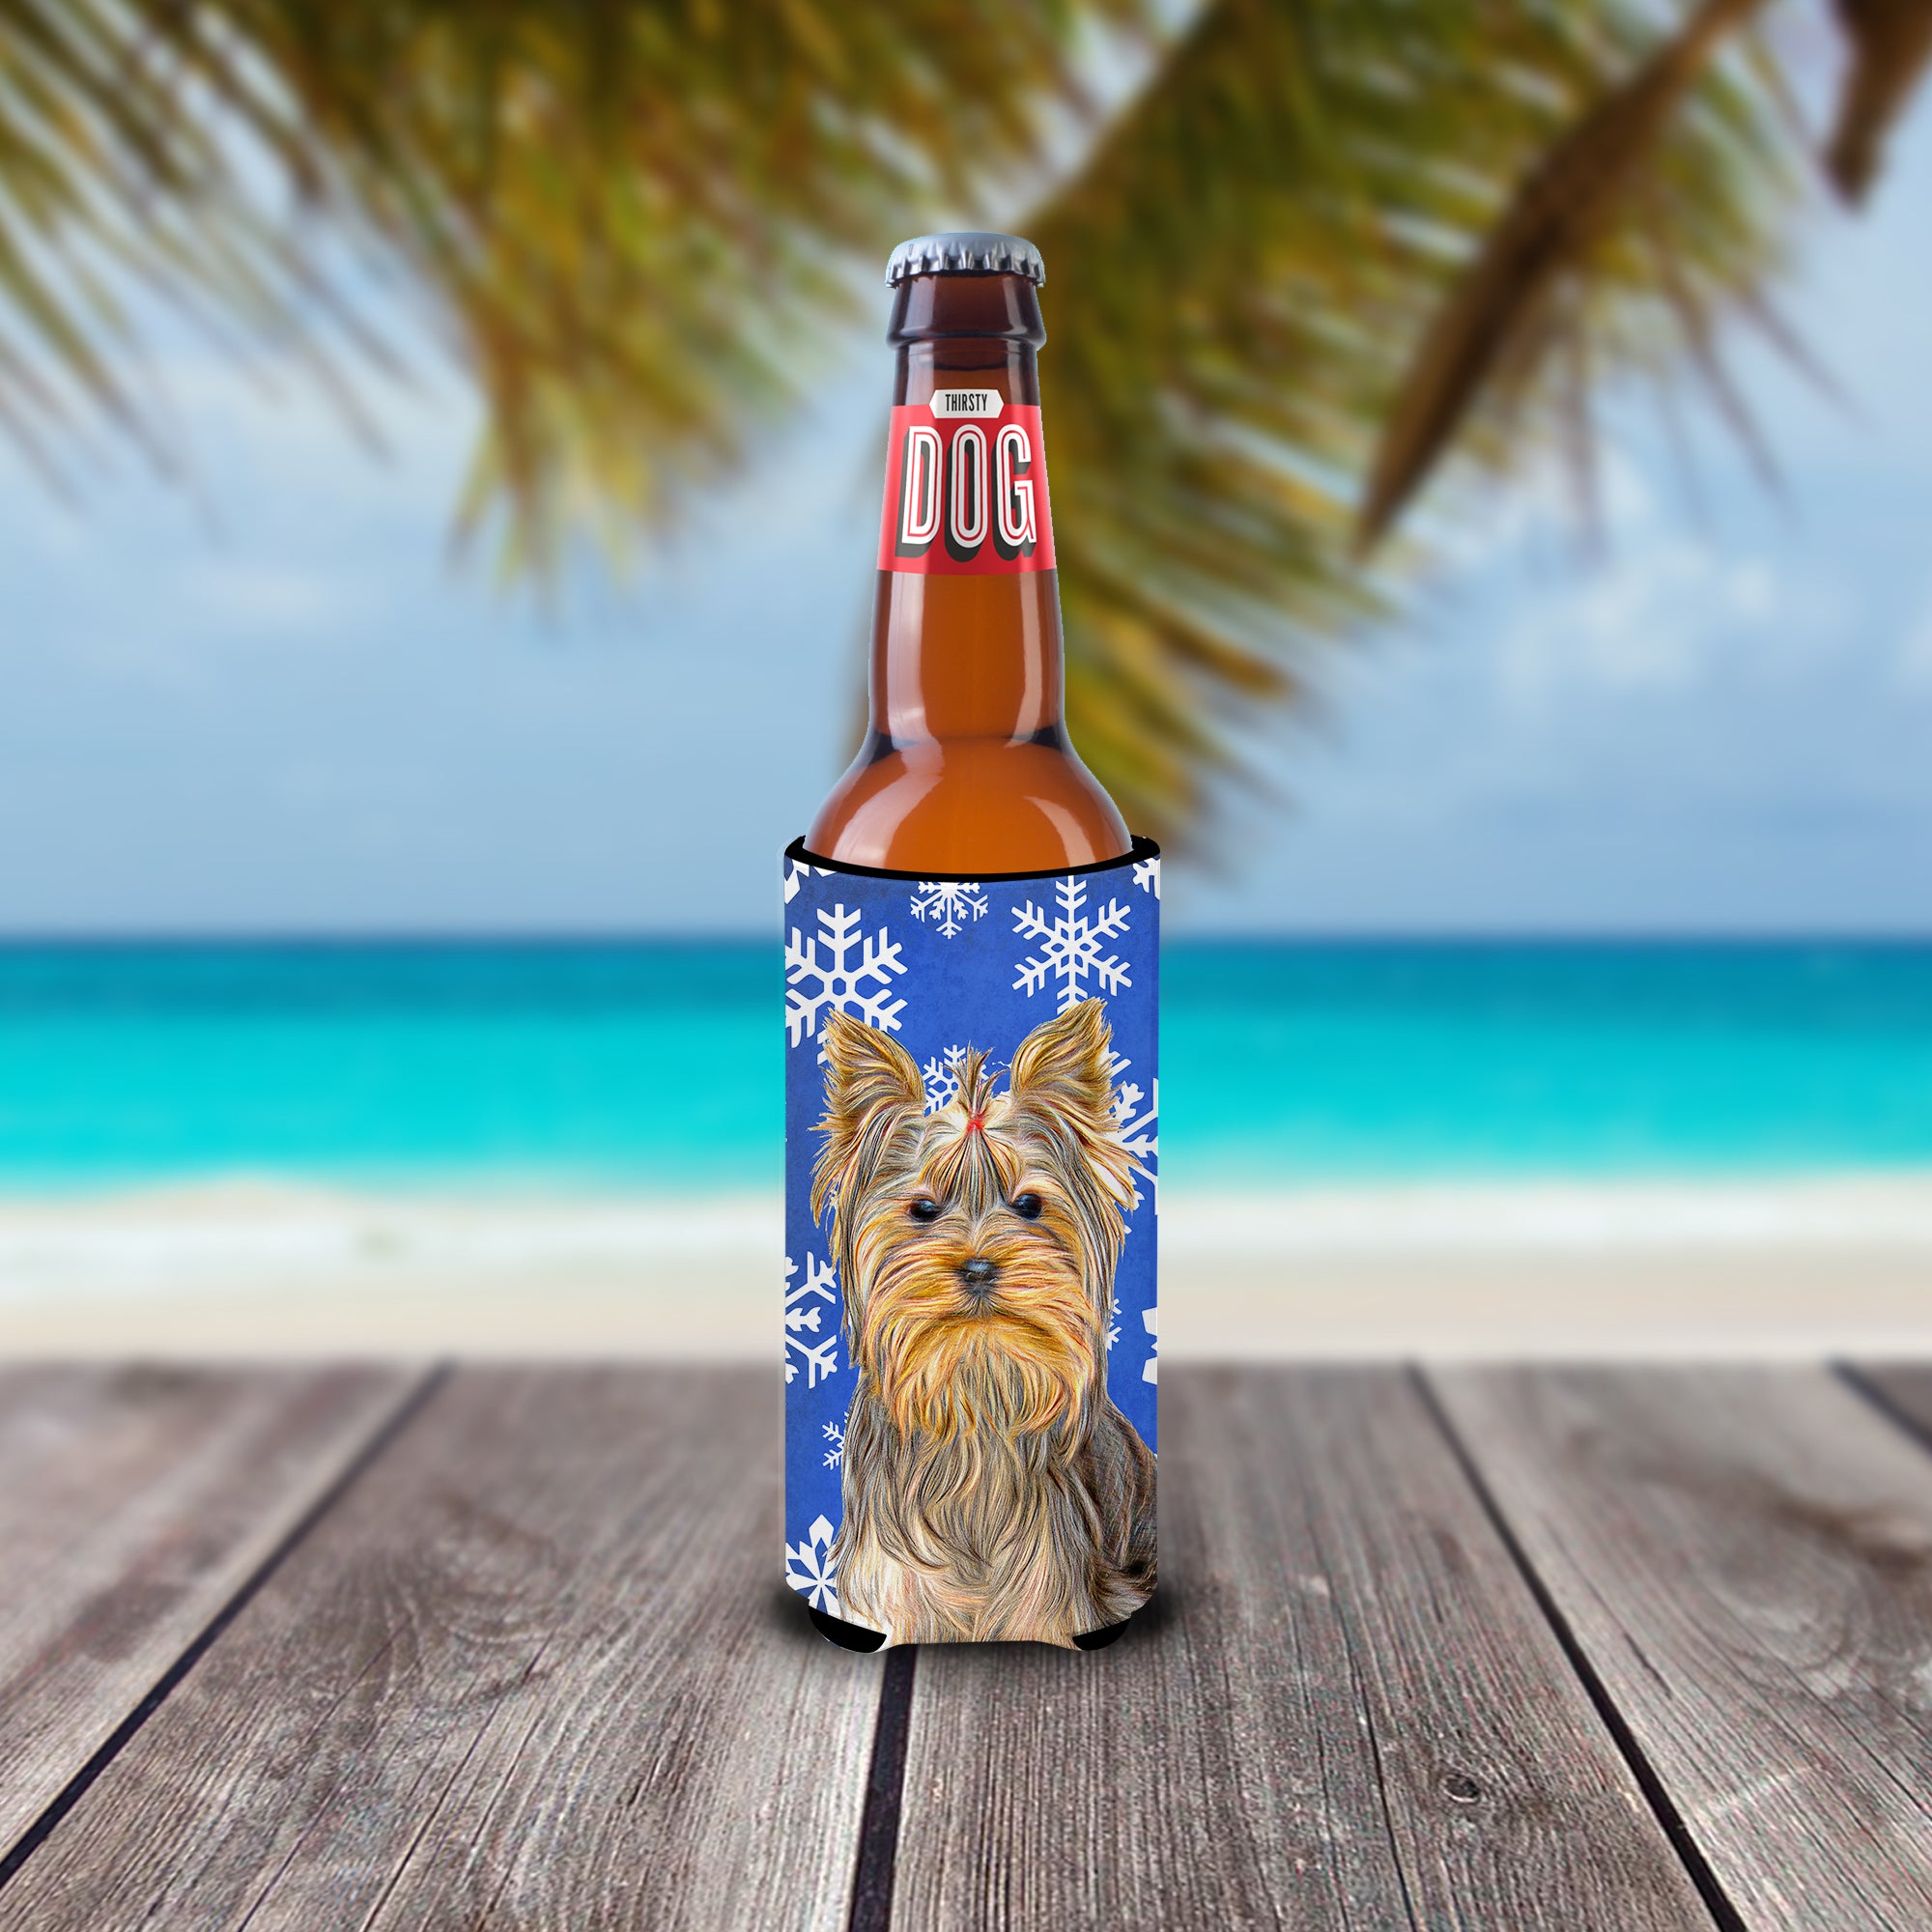 Winter Snowflakes Holiday Yorkie / Yorkshire Terrier Ultra Beverage Insulators for slim cans KJ1177MUK